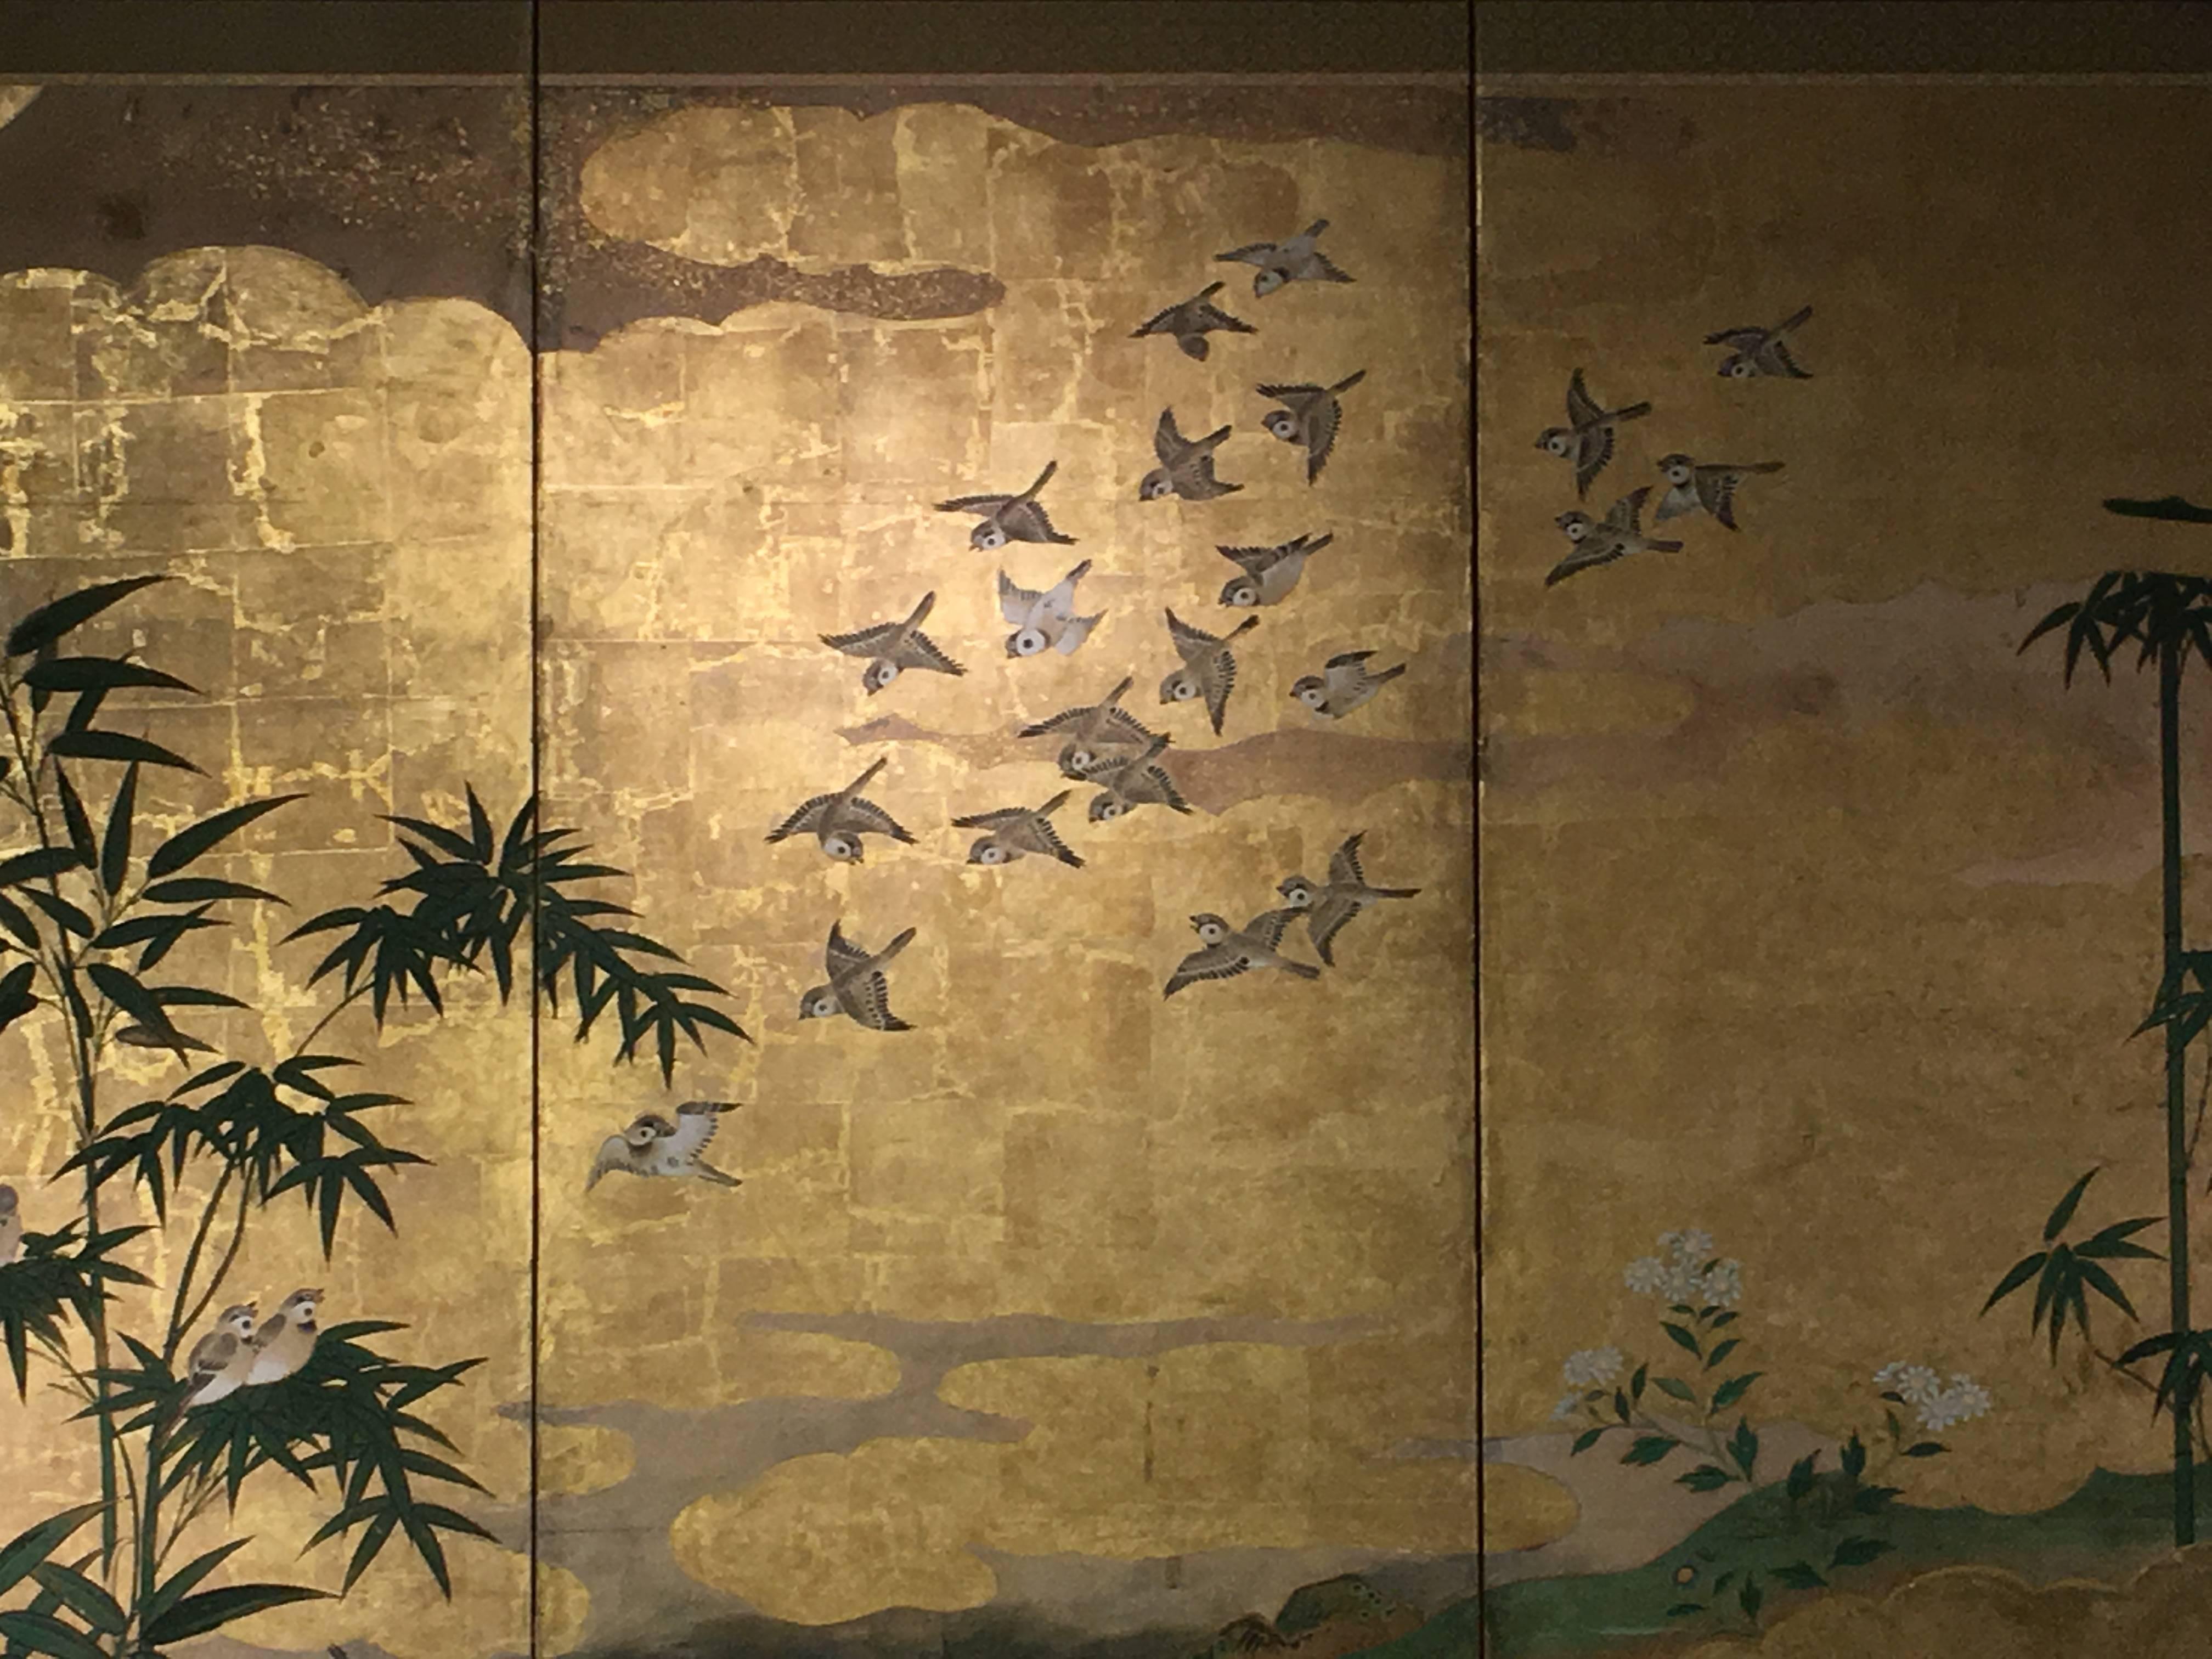 Edo Japanese Six-Panel Screen, Sparrows and the Three Friends of Winter, circa 1800